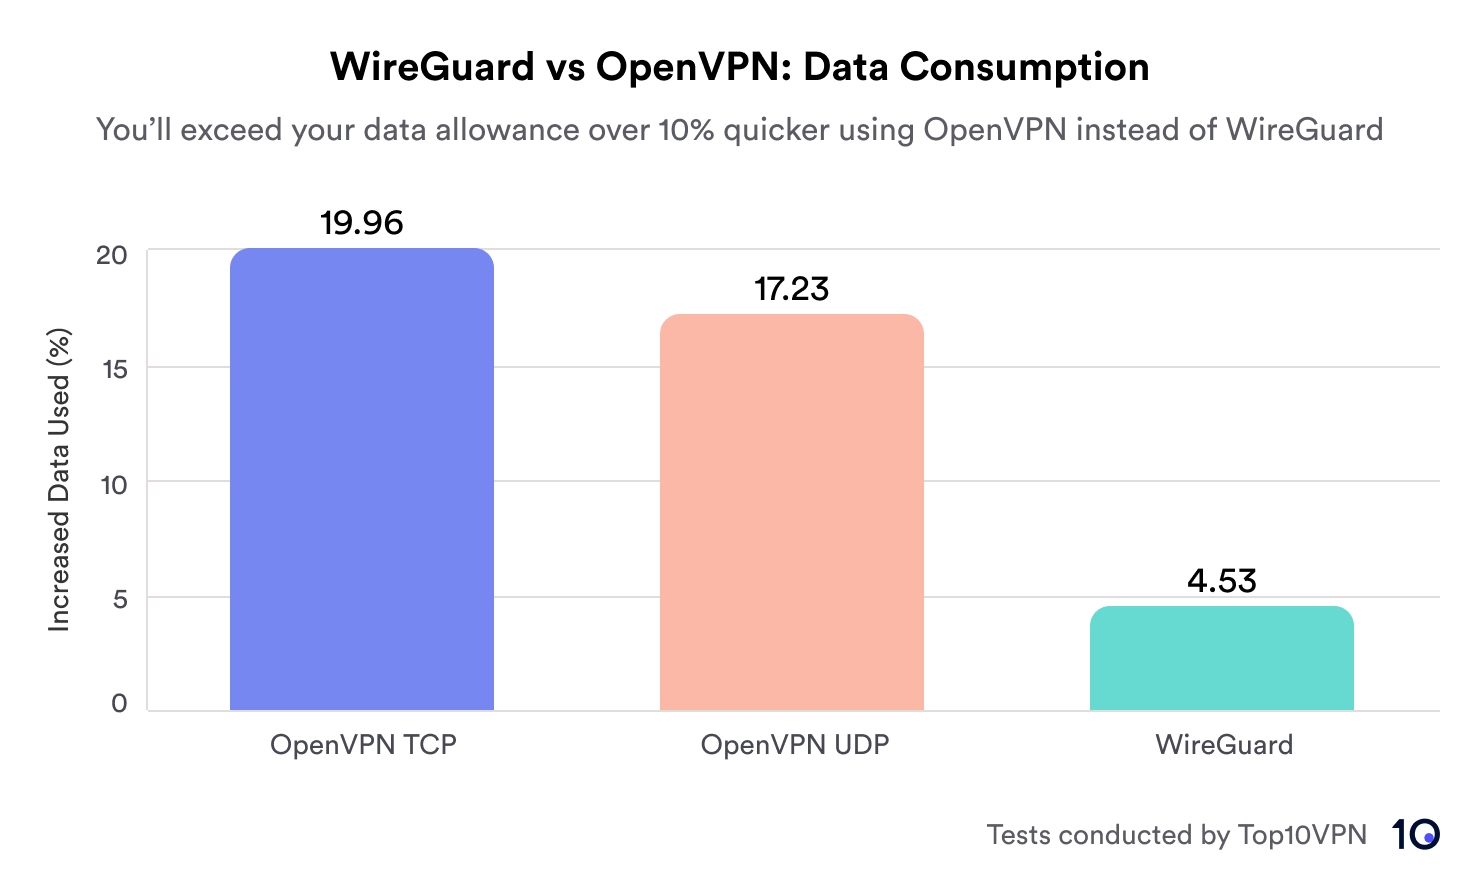 bar chart showing the data consumption of OpenVPN TCP (+19.96%), OpenVPN UDP (+17.23%), and WireGuard (+4.53%)